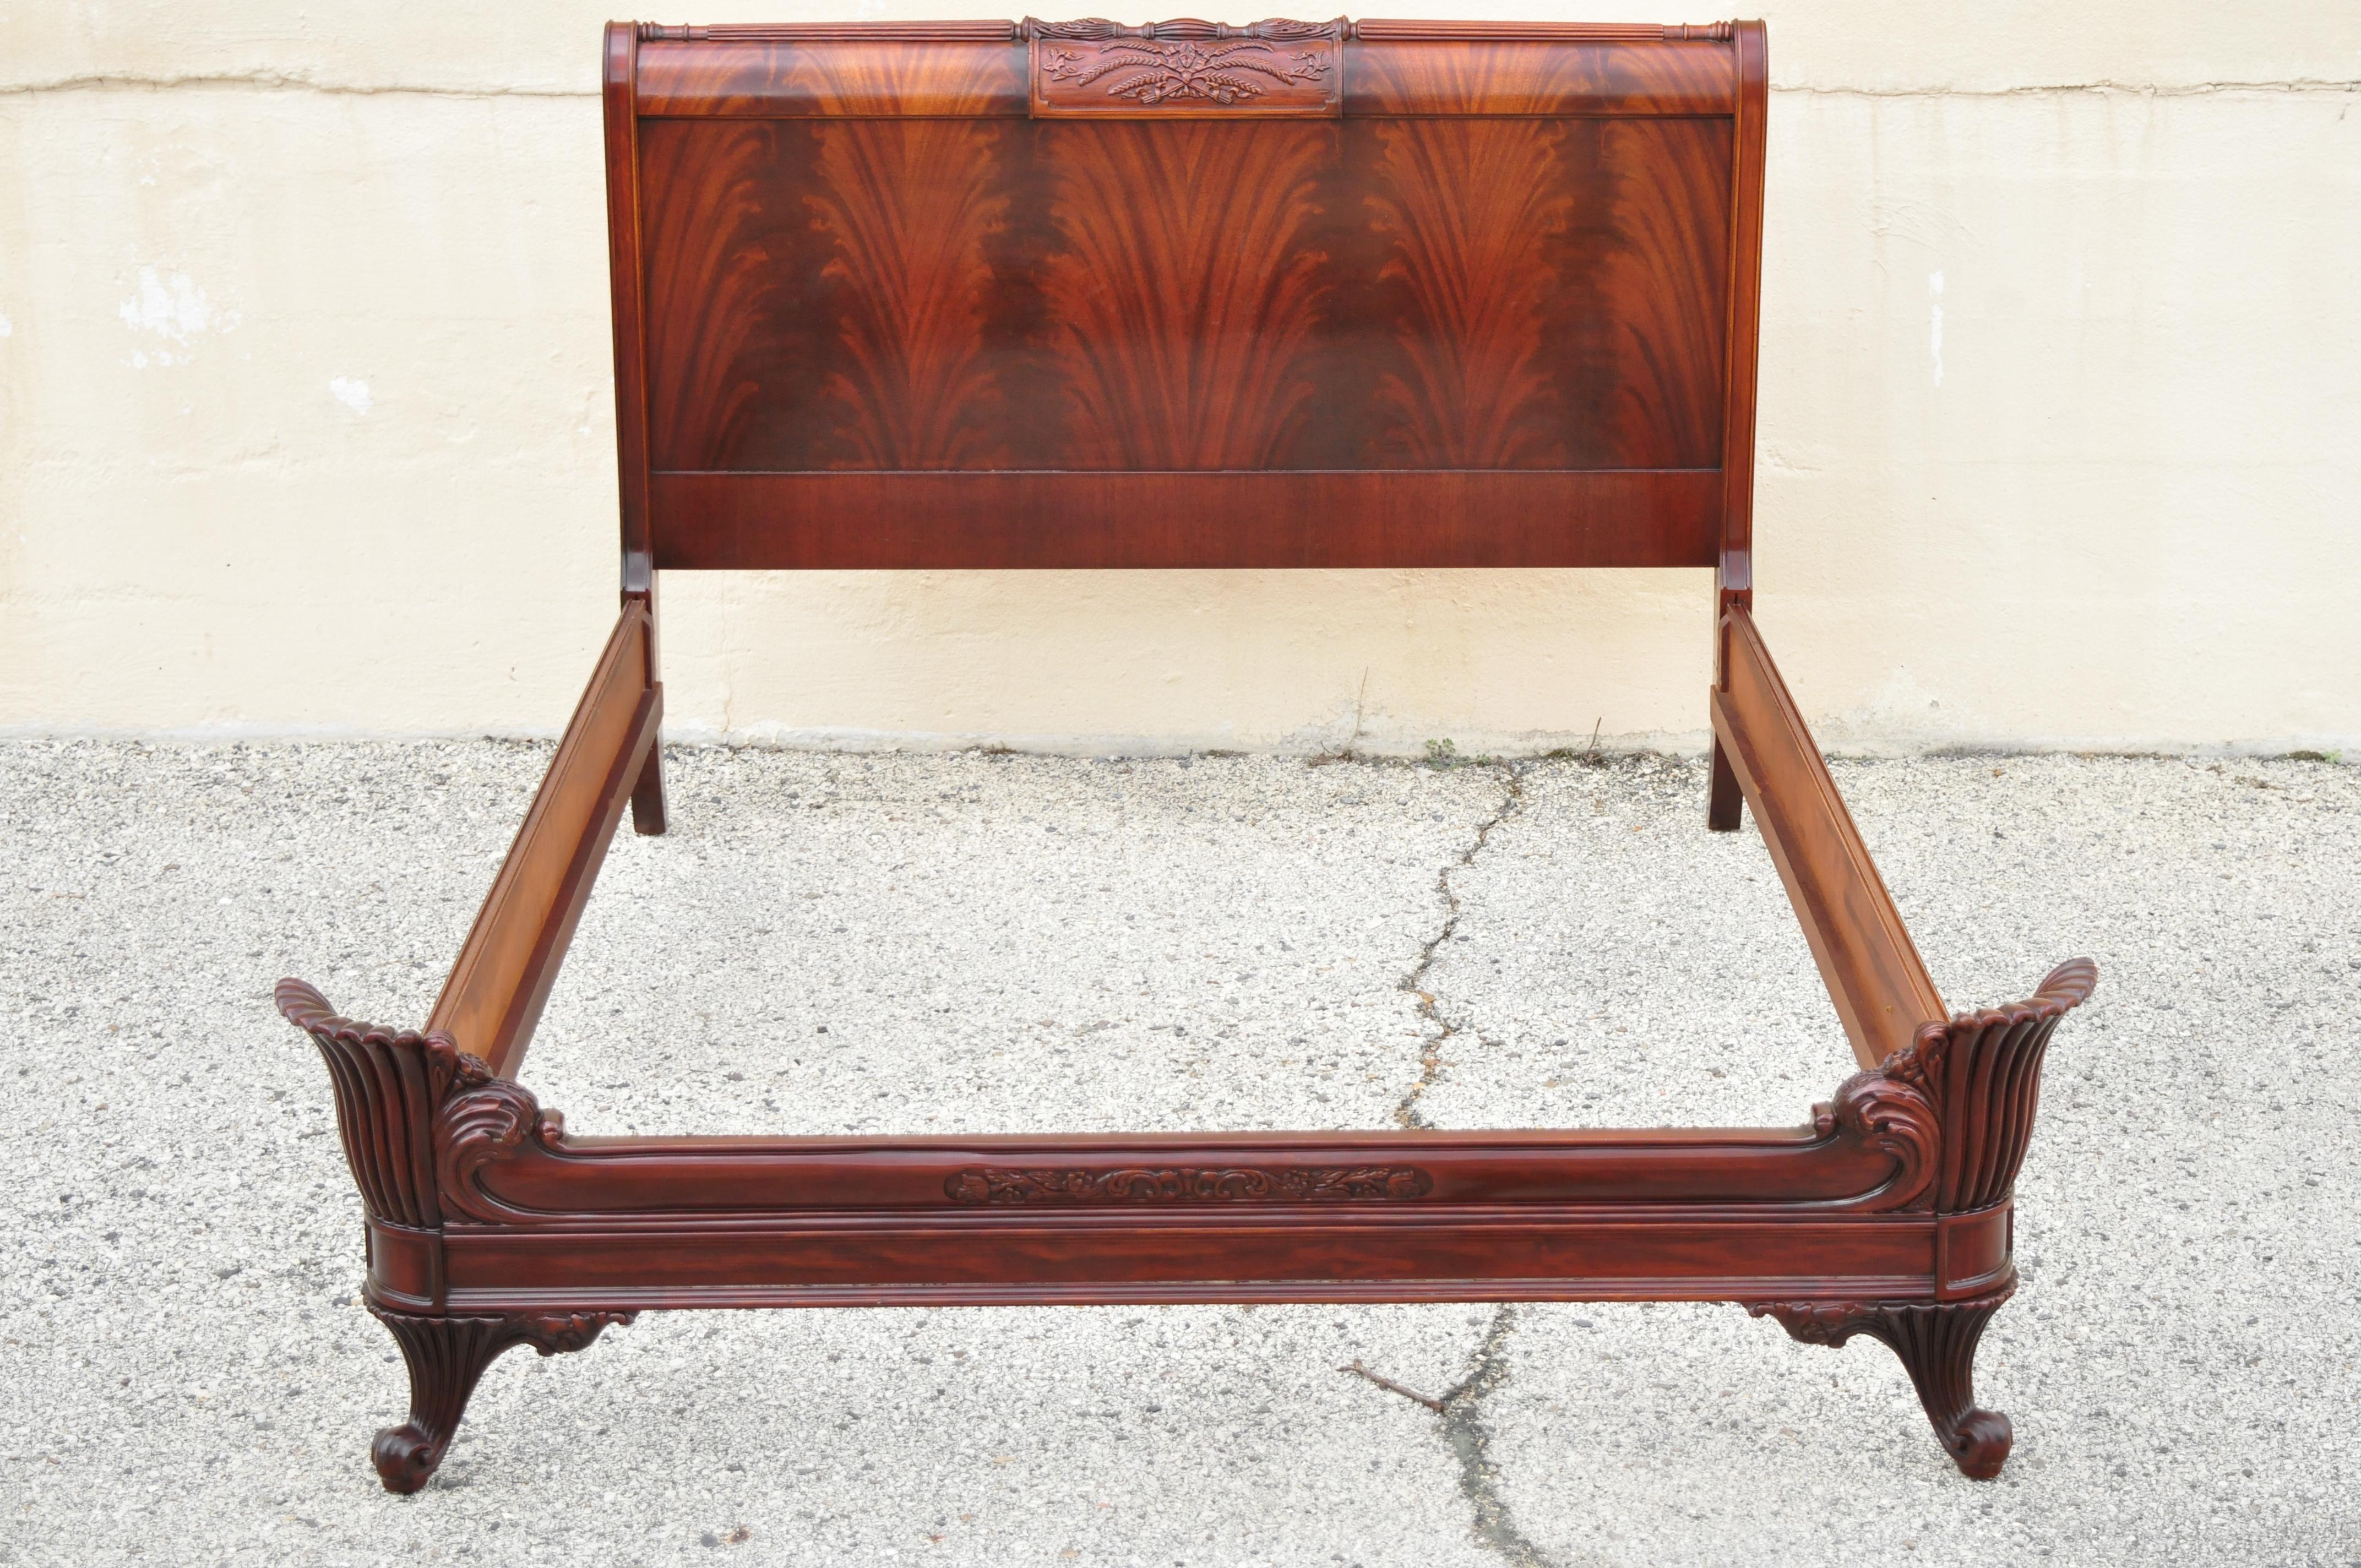 Vintage Chinese Chippendale mahogany carved wheat sheaf full size bed frame. Item features a wheat sheaf carved headboard, fan carved footboard, beautiful wood grain, quality American craftsmanship, great style and form, circa early to mid-20th